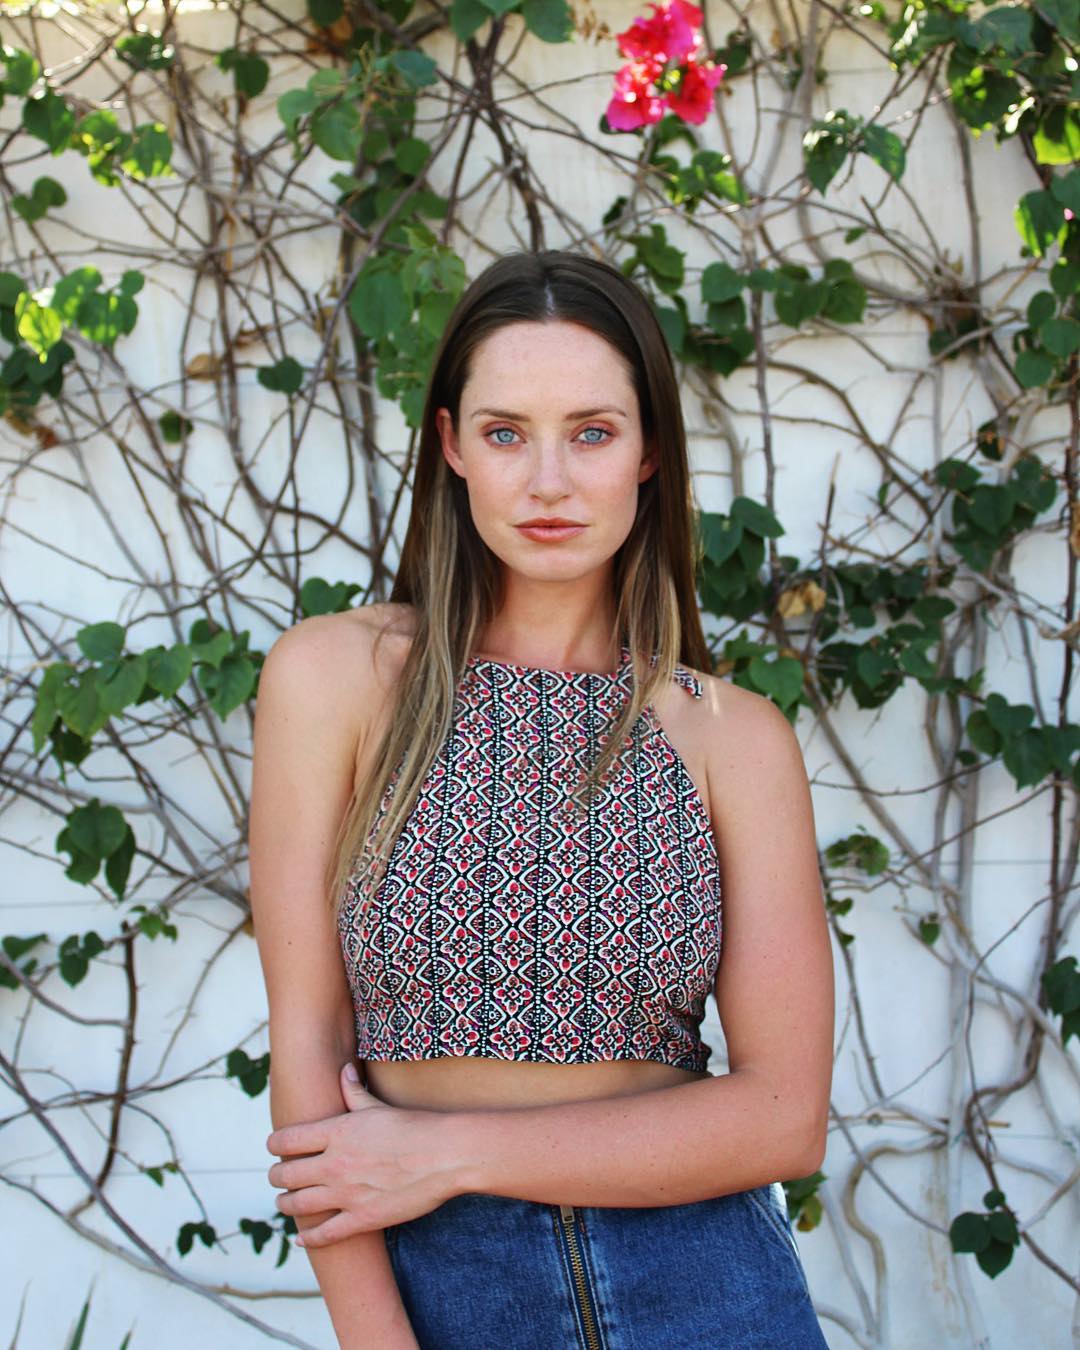 Hot Picture Of Merritt Patterson Which Are Here To Make Your Day